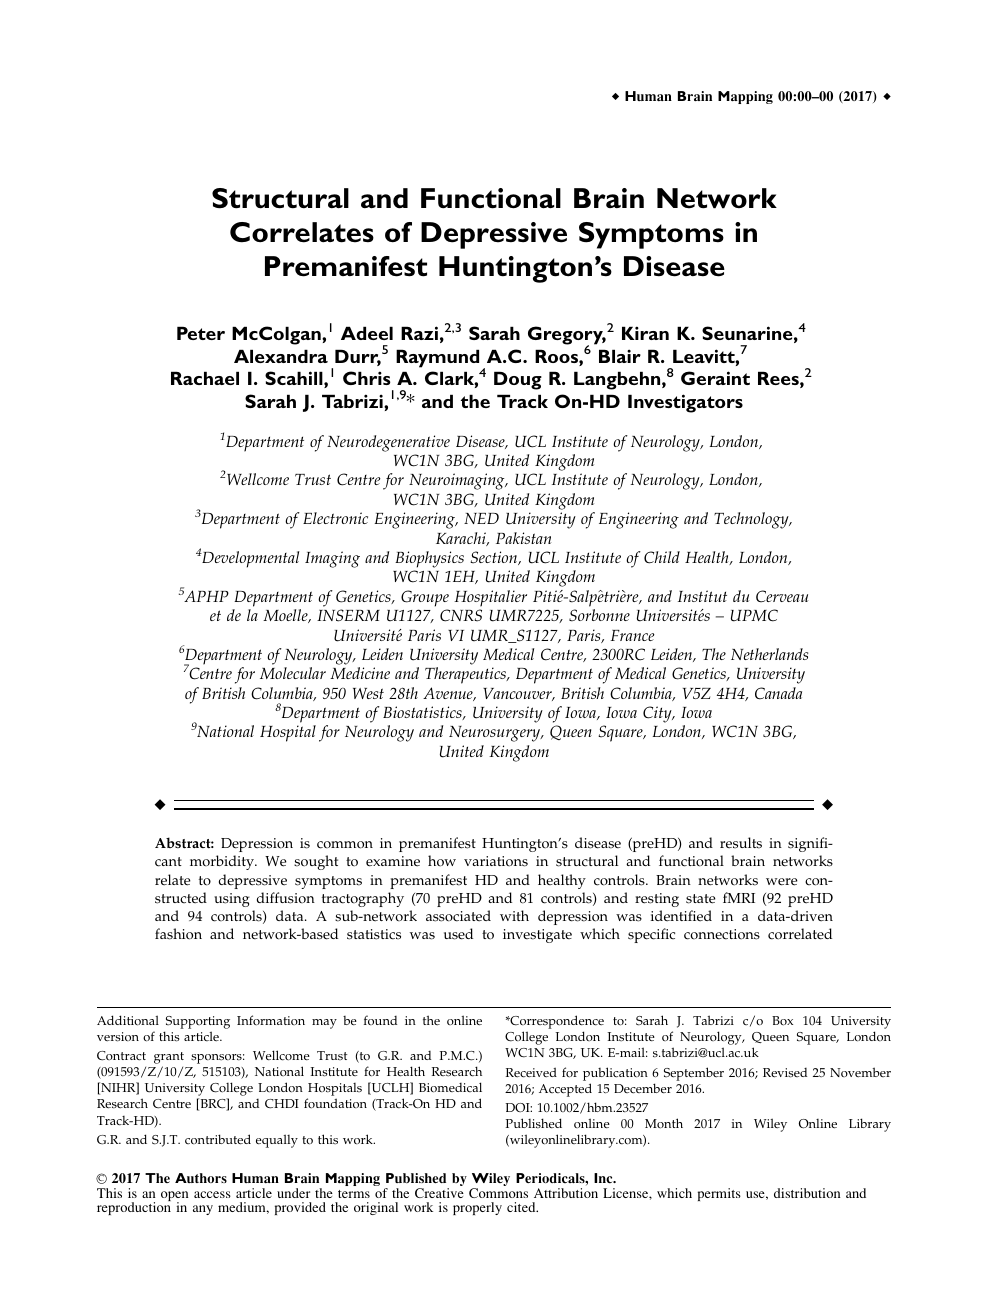 Structural And Functional Brain Network Correlates Of Depressive Symptoms In Premanifest Huntington S Disease Topic Of Research Paper In Clinical Medicine Download Scholarly Article Pdf And Read For Free On Cyberleninka Open